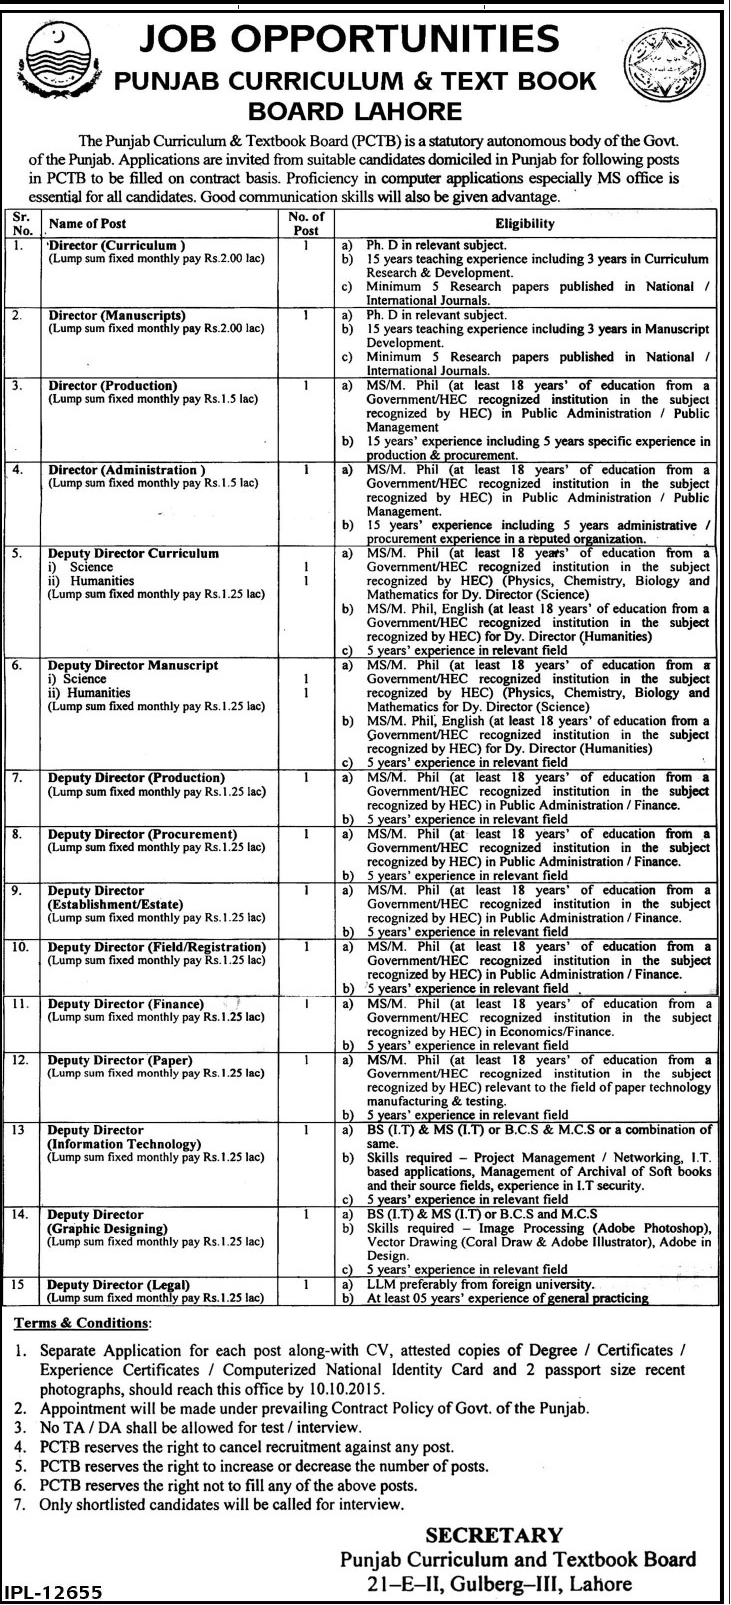 Punjab Curriculum And Textbook Board Jobs 2016 In PCTB Application Form, Last Date